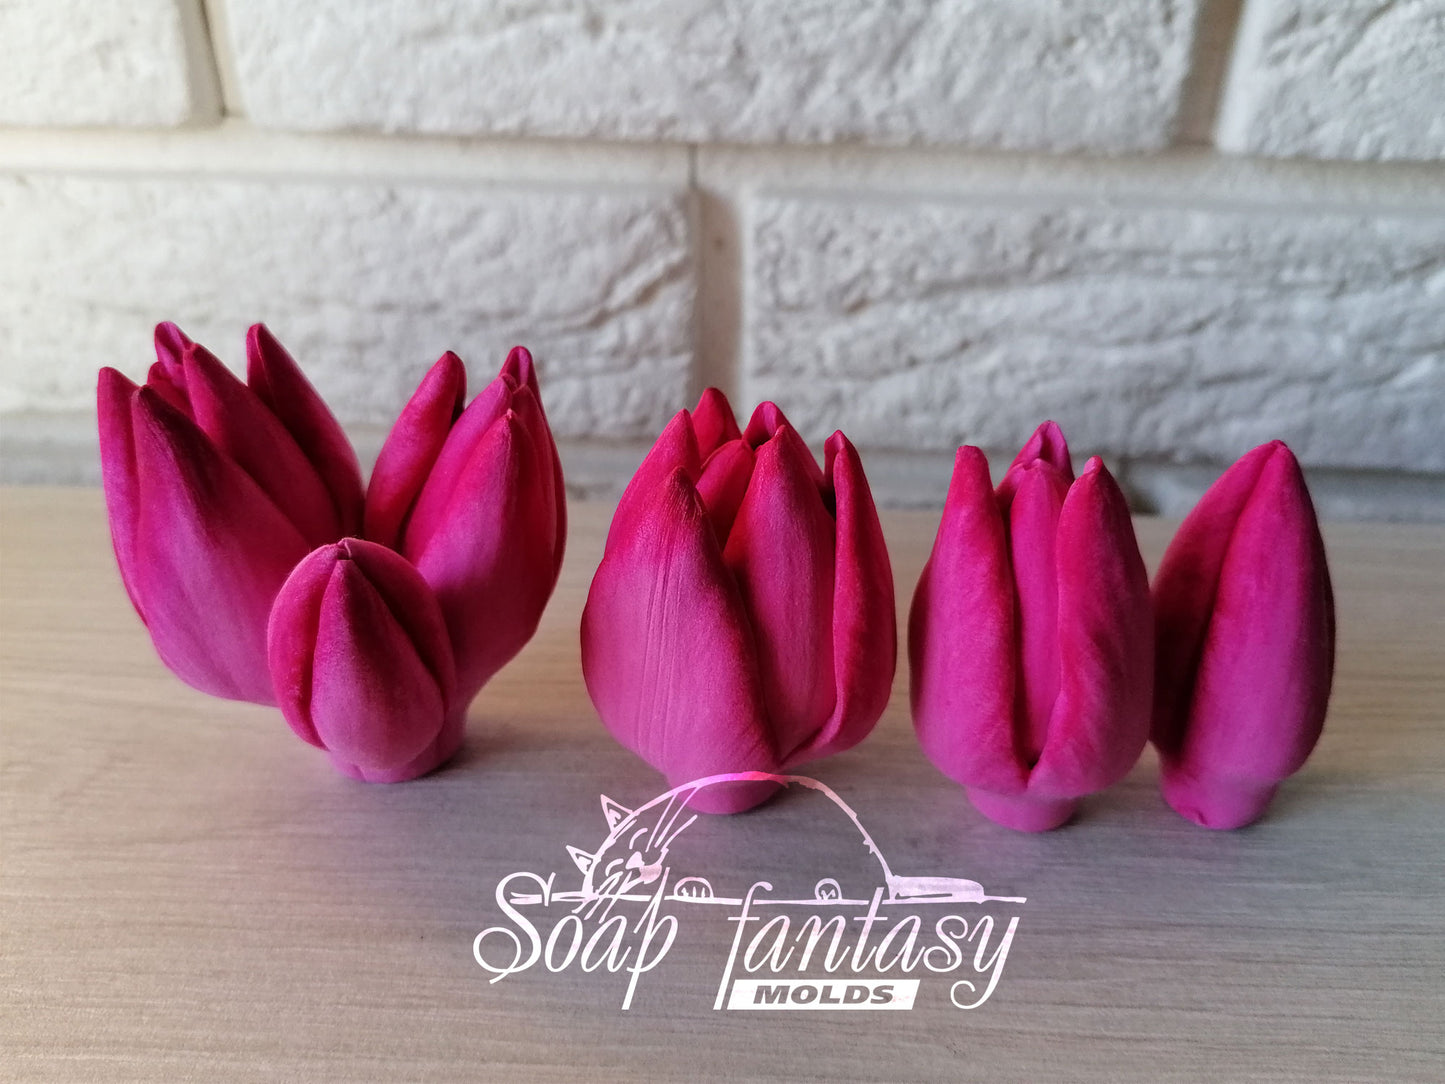 Tulip "Purple prince" buds silicone mold for soap making